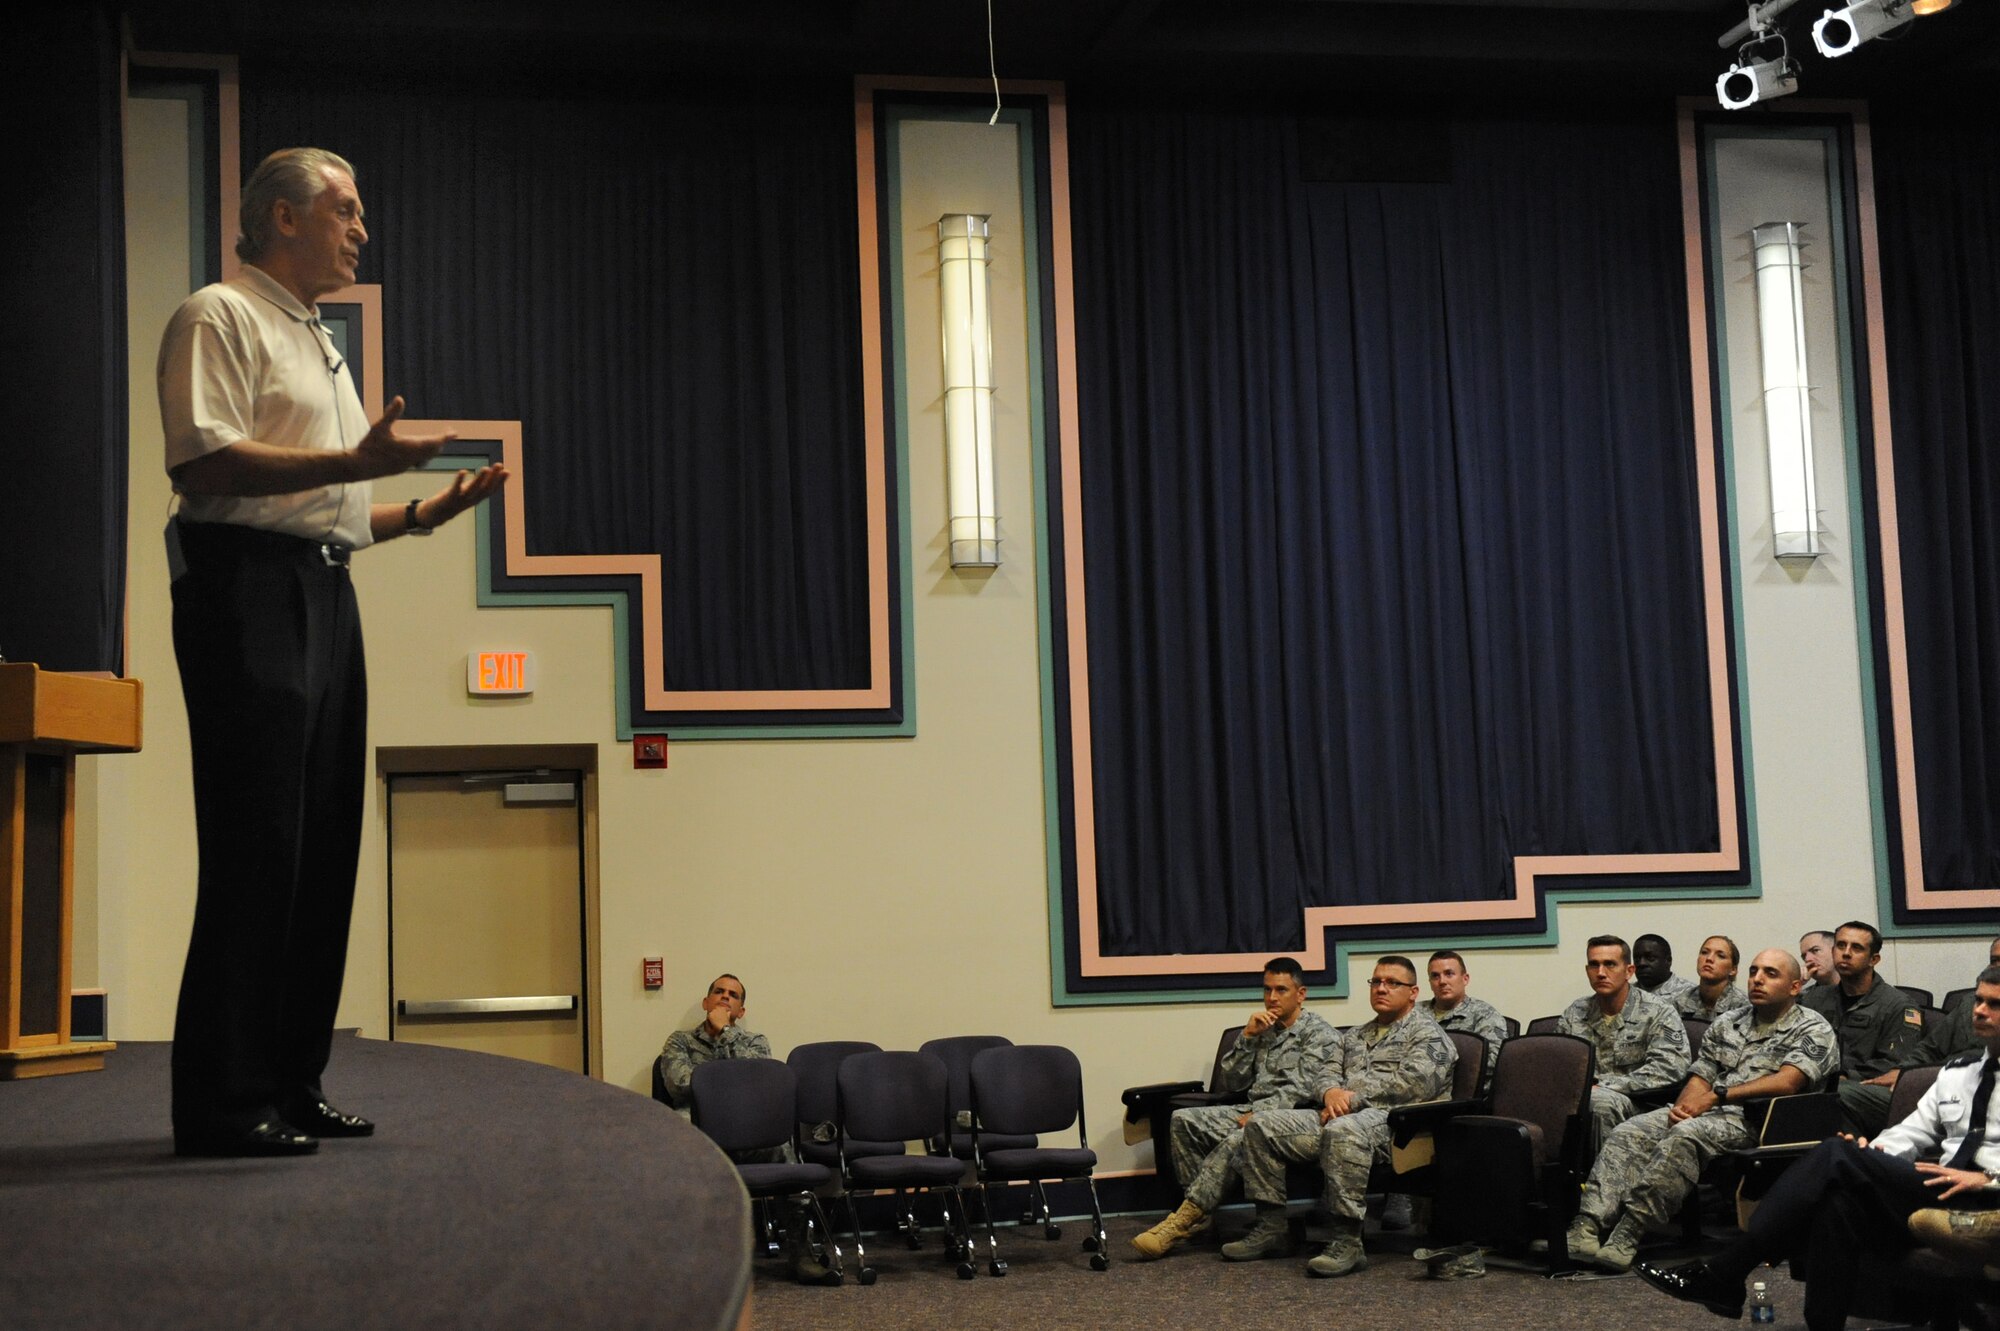 Pat Riley, Miami HEAT president, speaks to U.S. Air Force members at the Commando Auditorium during the team's 2010 Training Camp on Hurlburt Field, Fla., Sept. 29, 2010. Mr. Riley spoke to the Airmen about the importance of leadership. (DoD photo by U.S. Air Force Airman 1st Class Caitlin O'Neil-McKeown/RELEASED)


